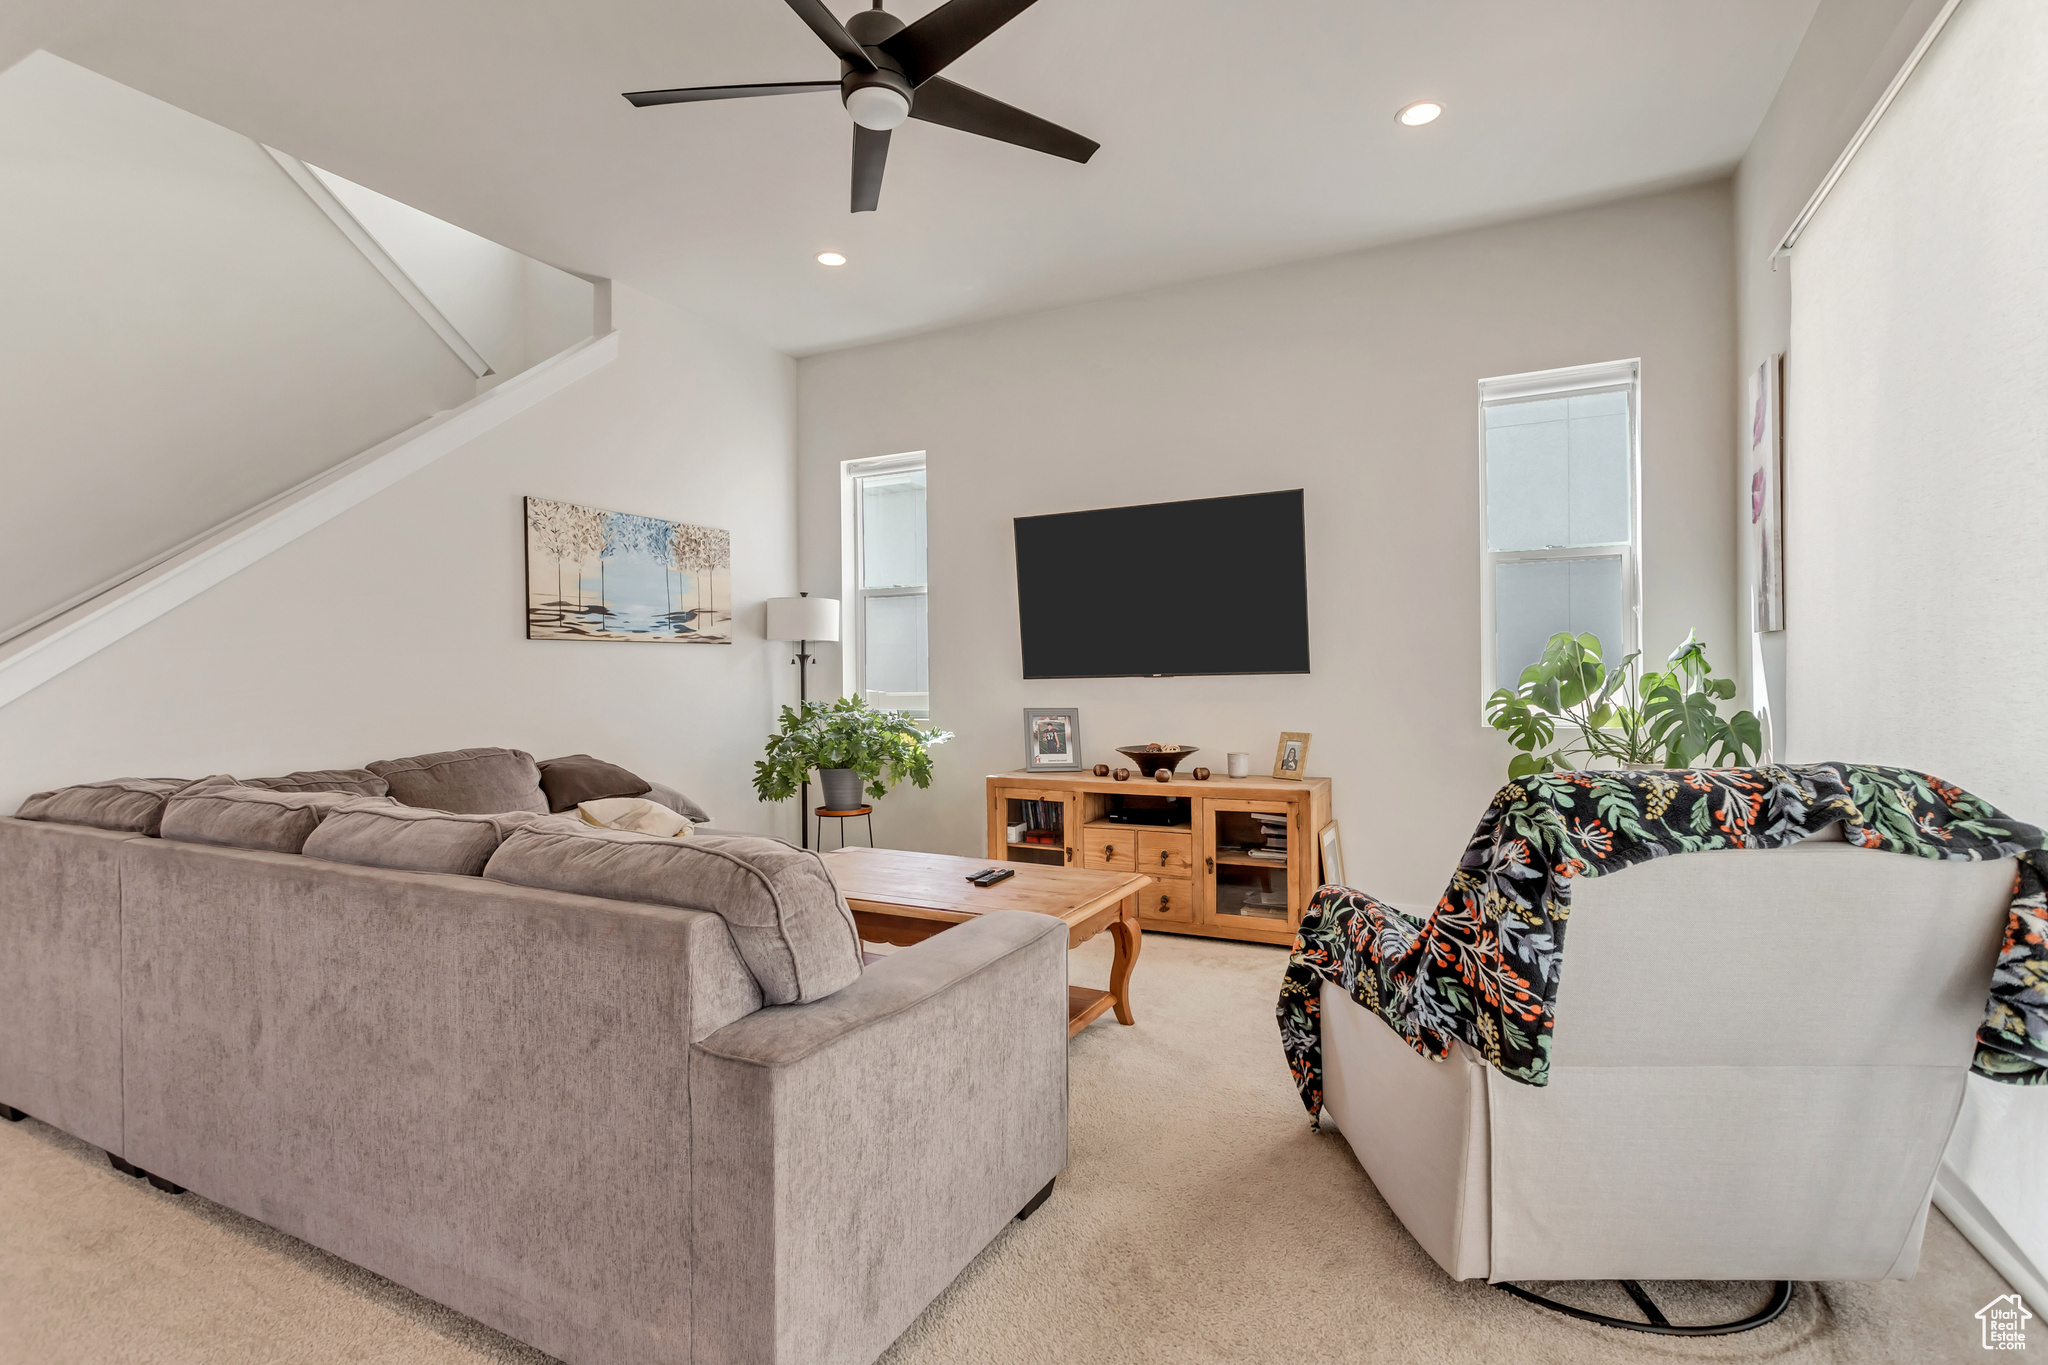 Living room featuring ceiling fan, carpet, and plenty of natural light